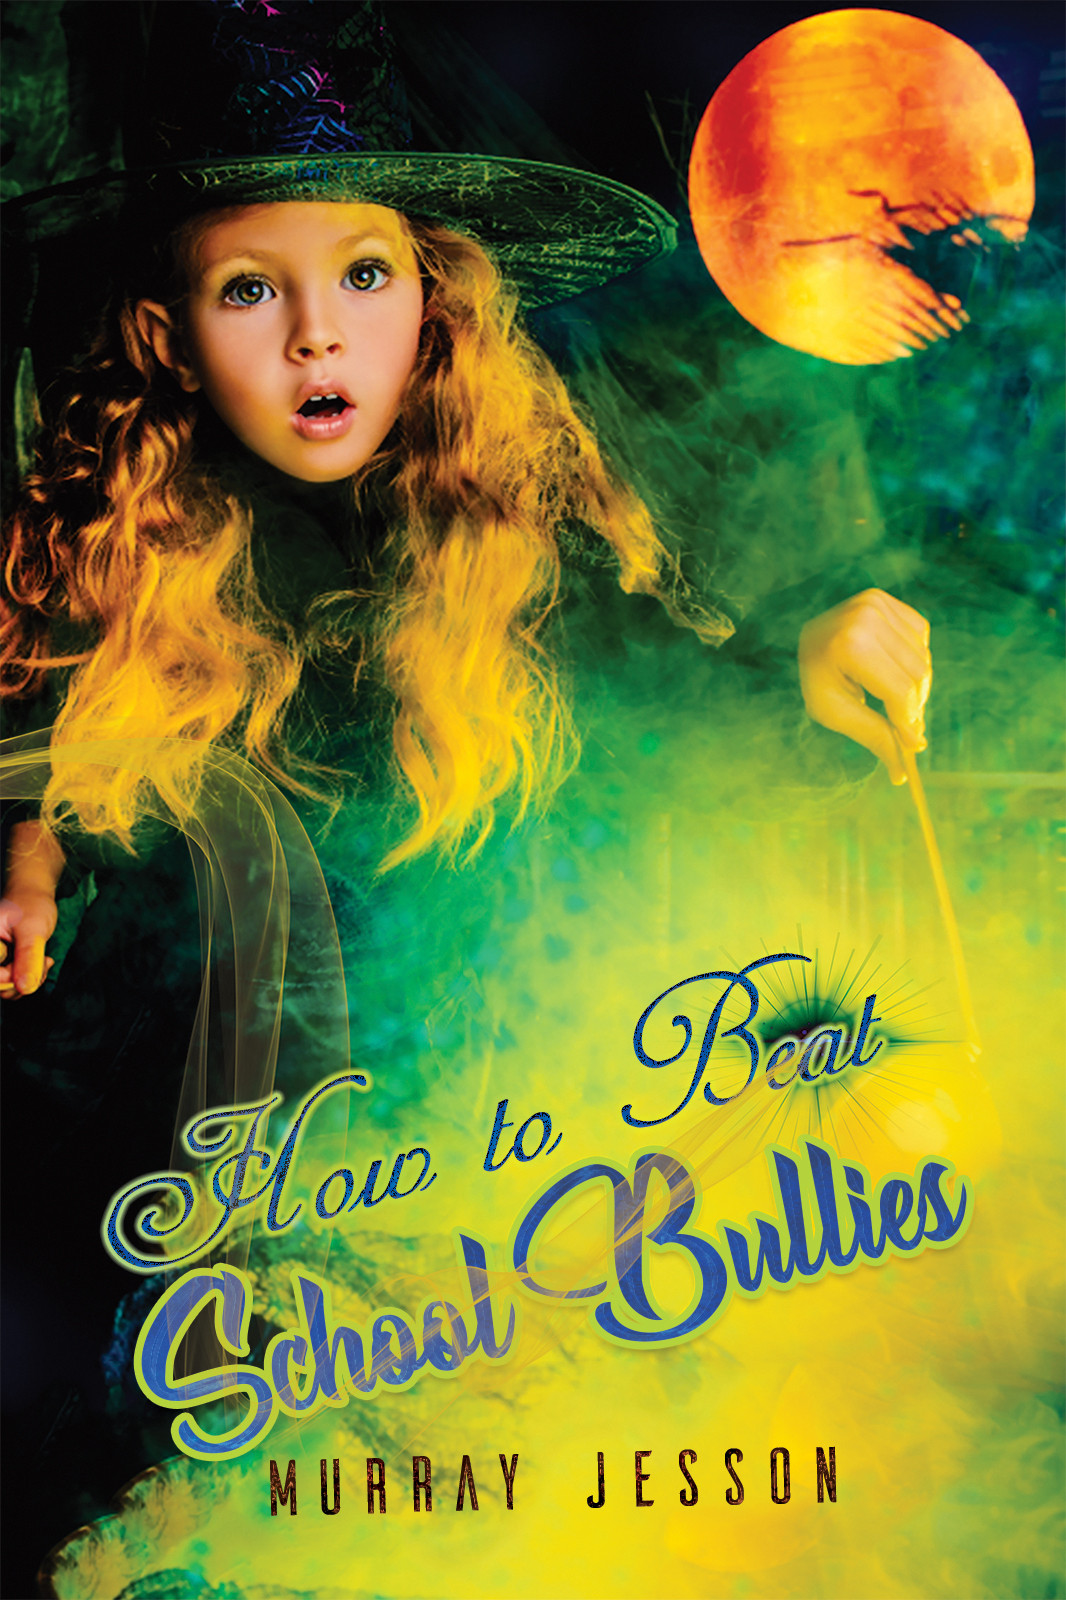 How to Beat School Bullies-bookcover